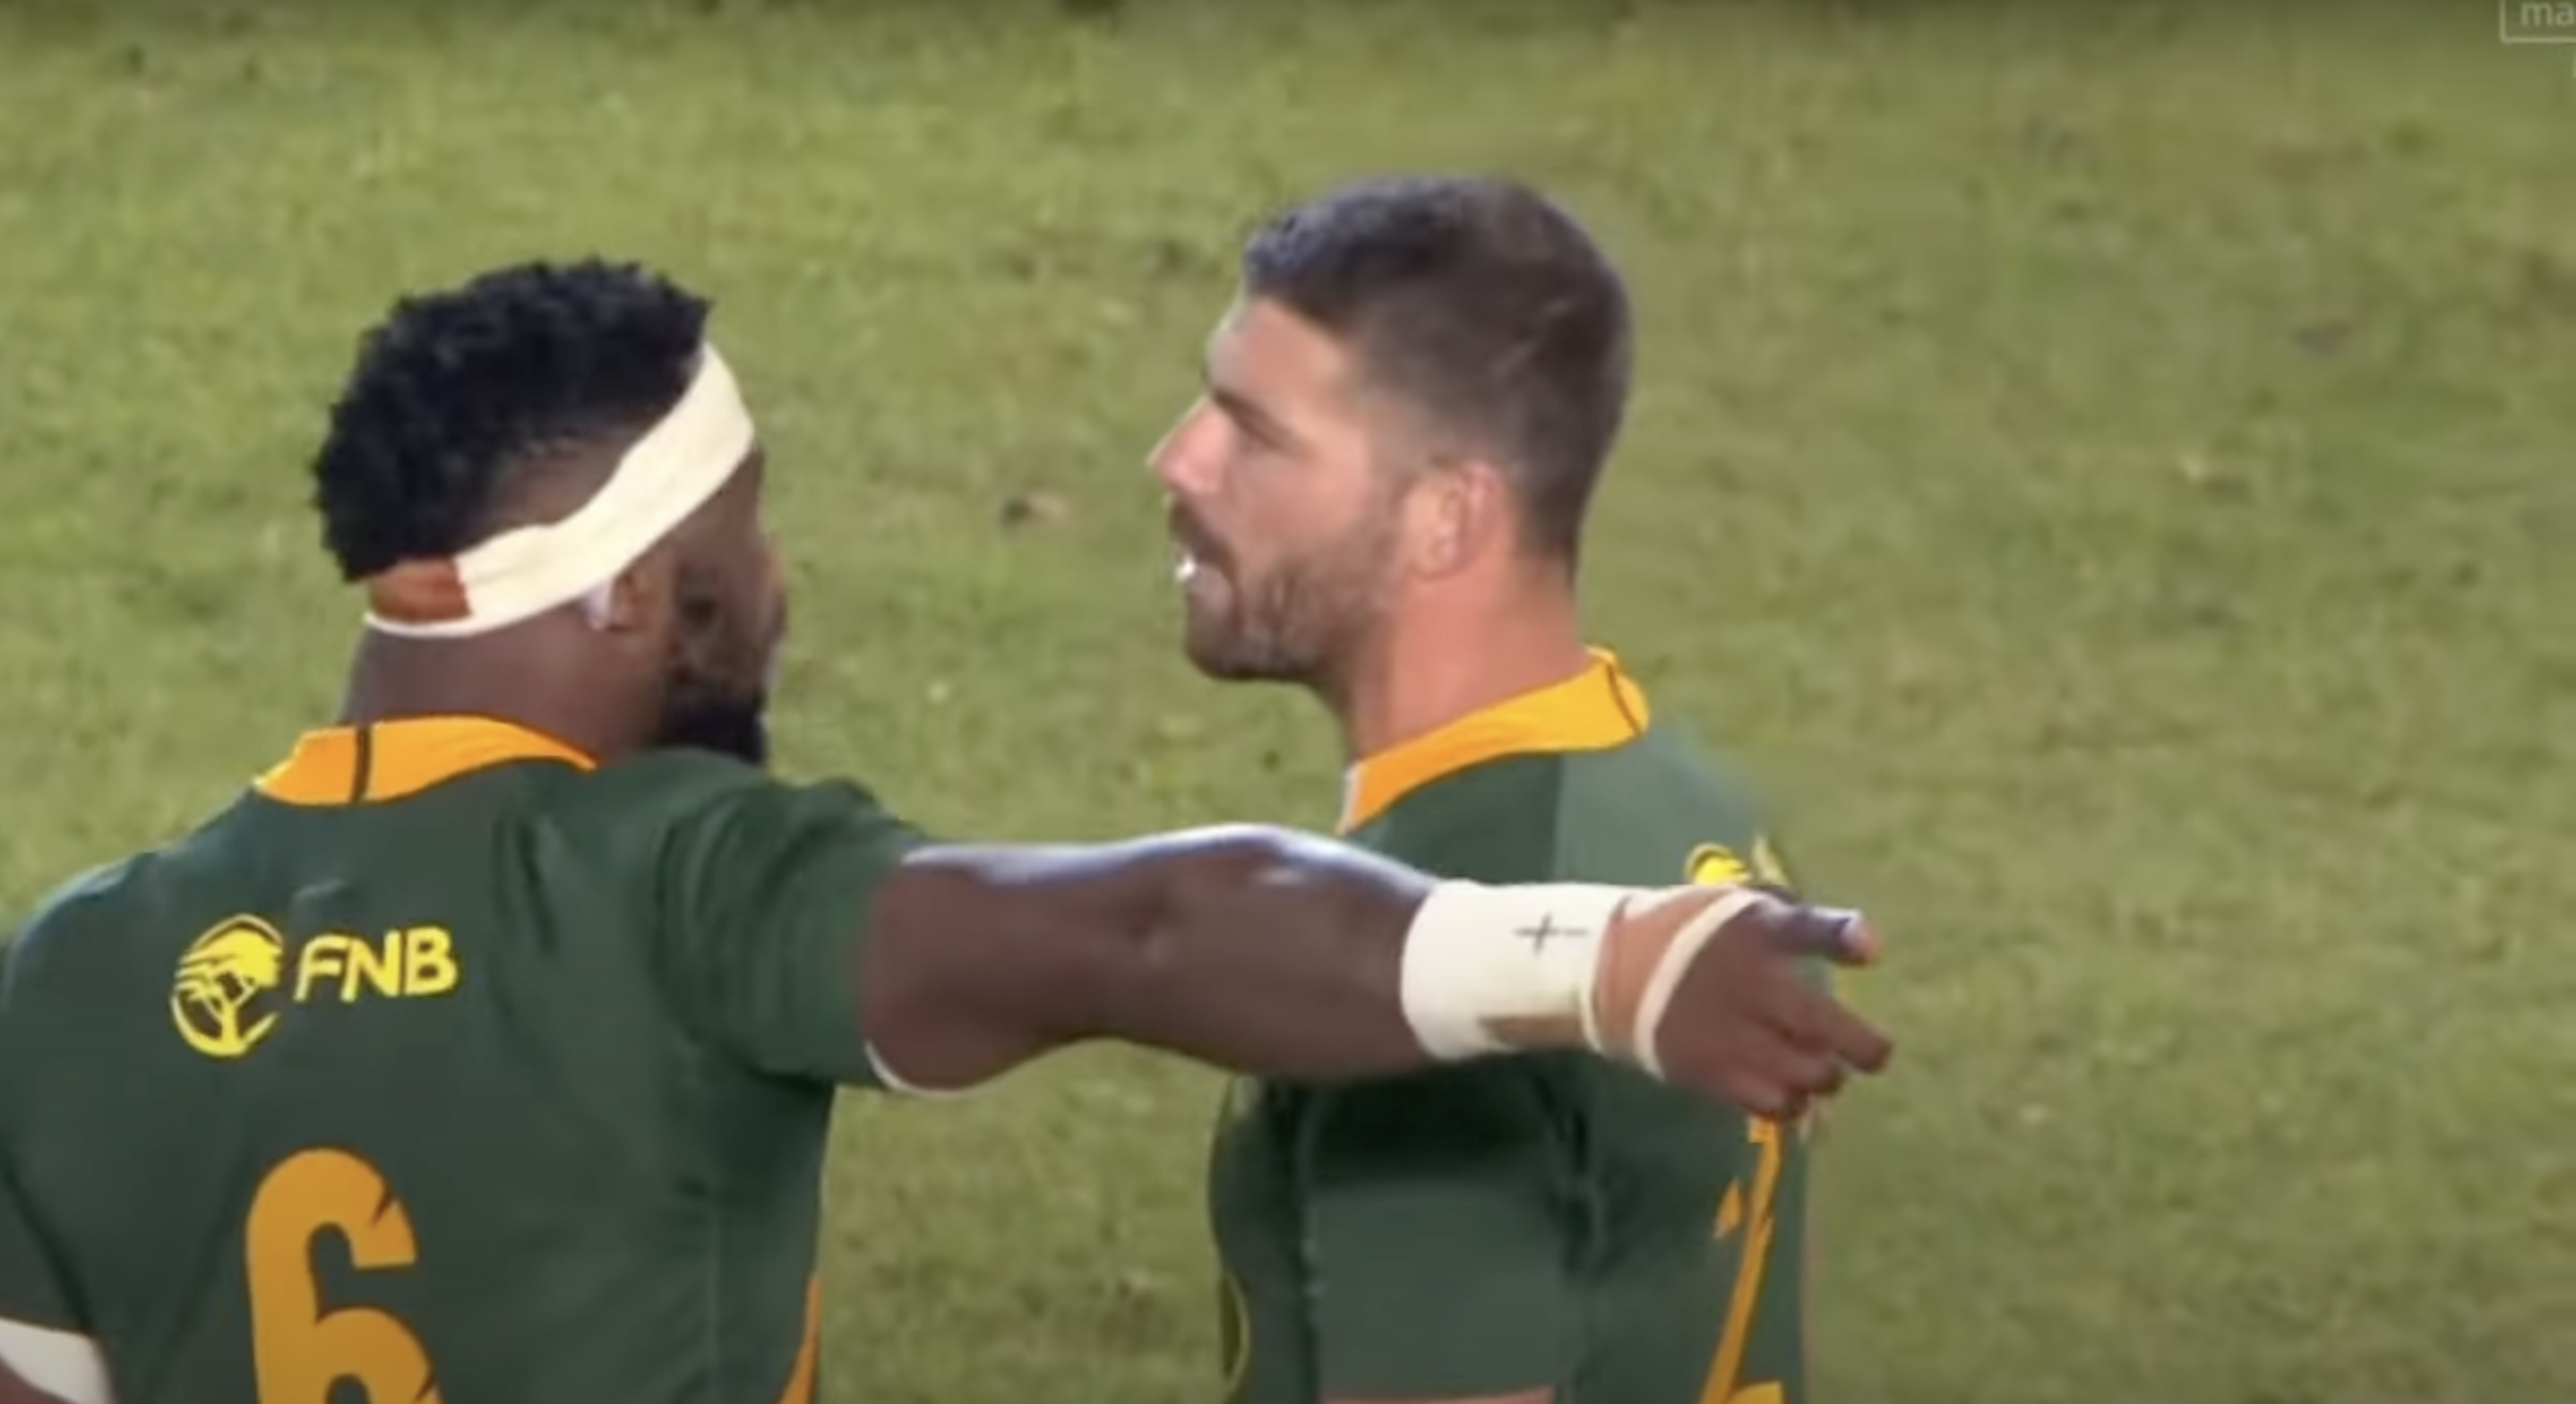 Fans left to speculate what Kolisi said to le Roux in heated exchange